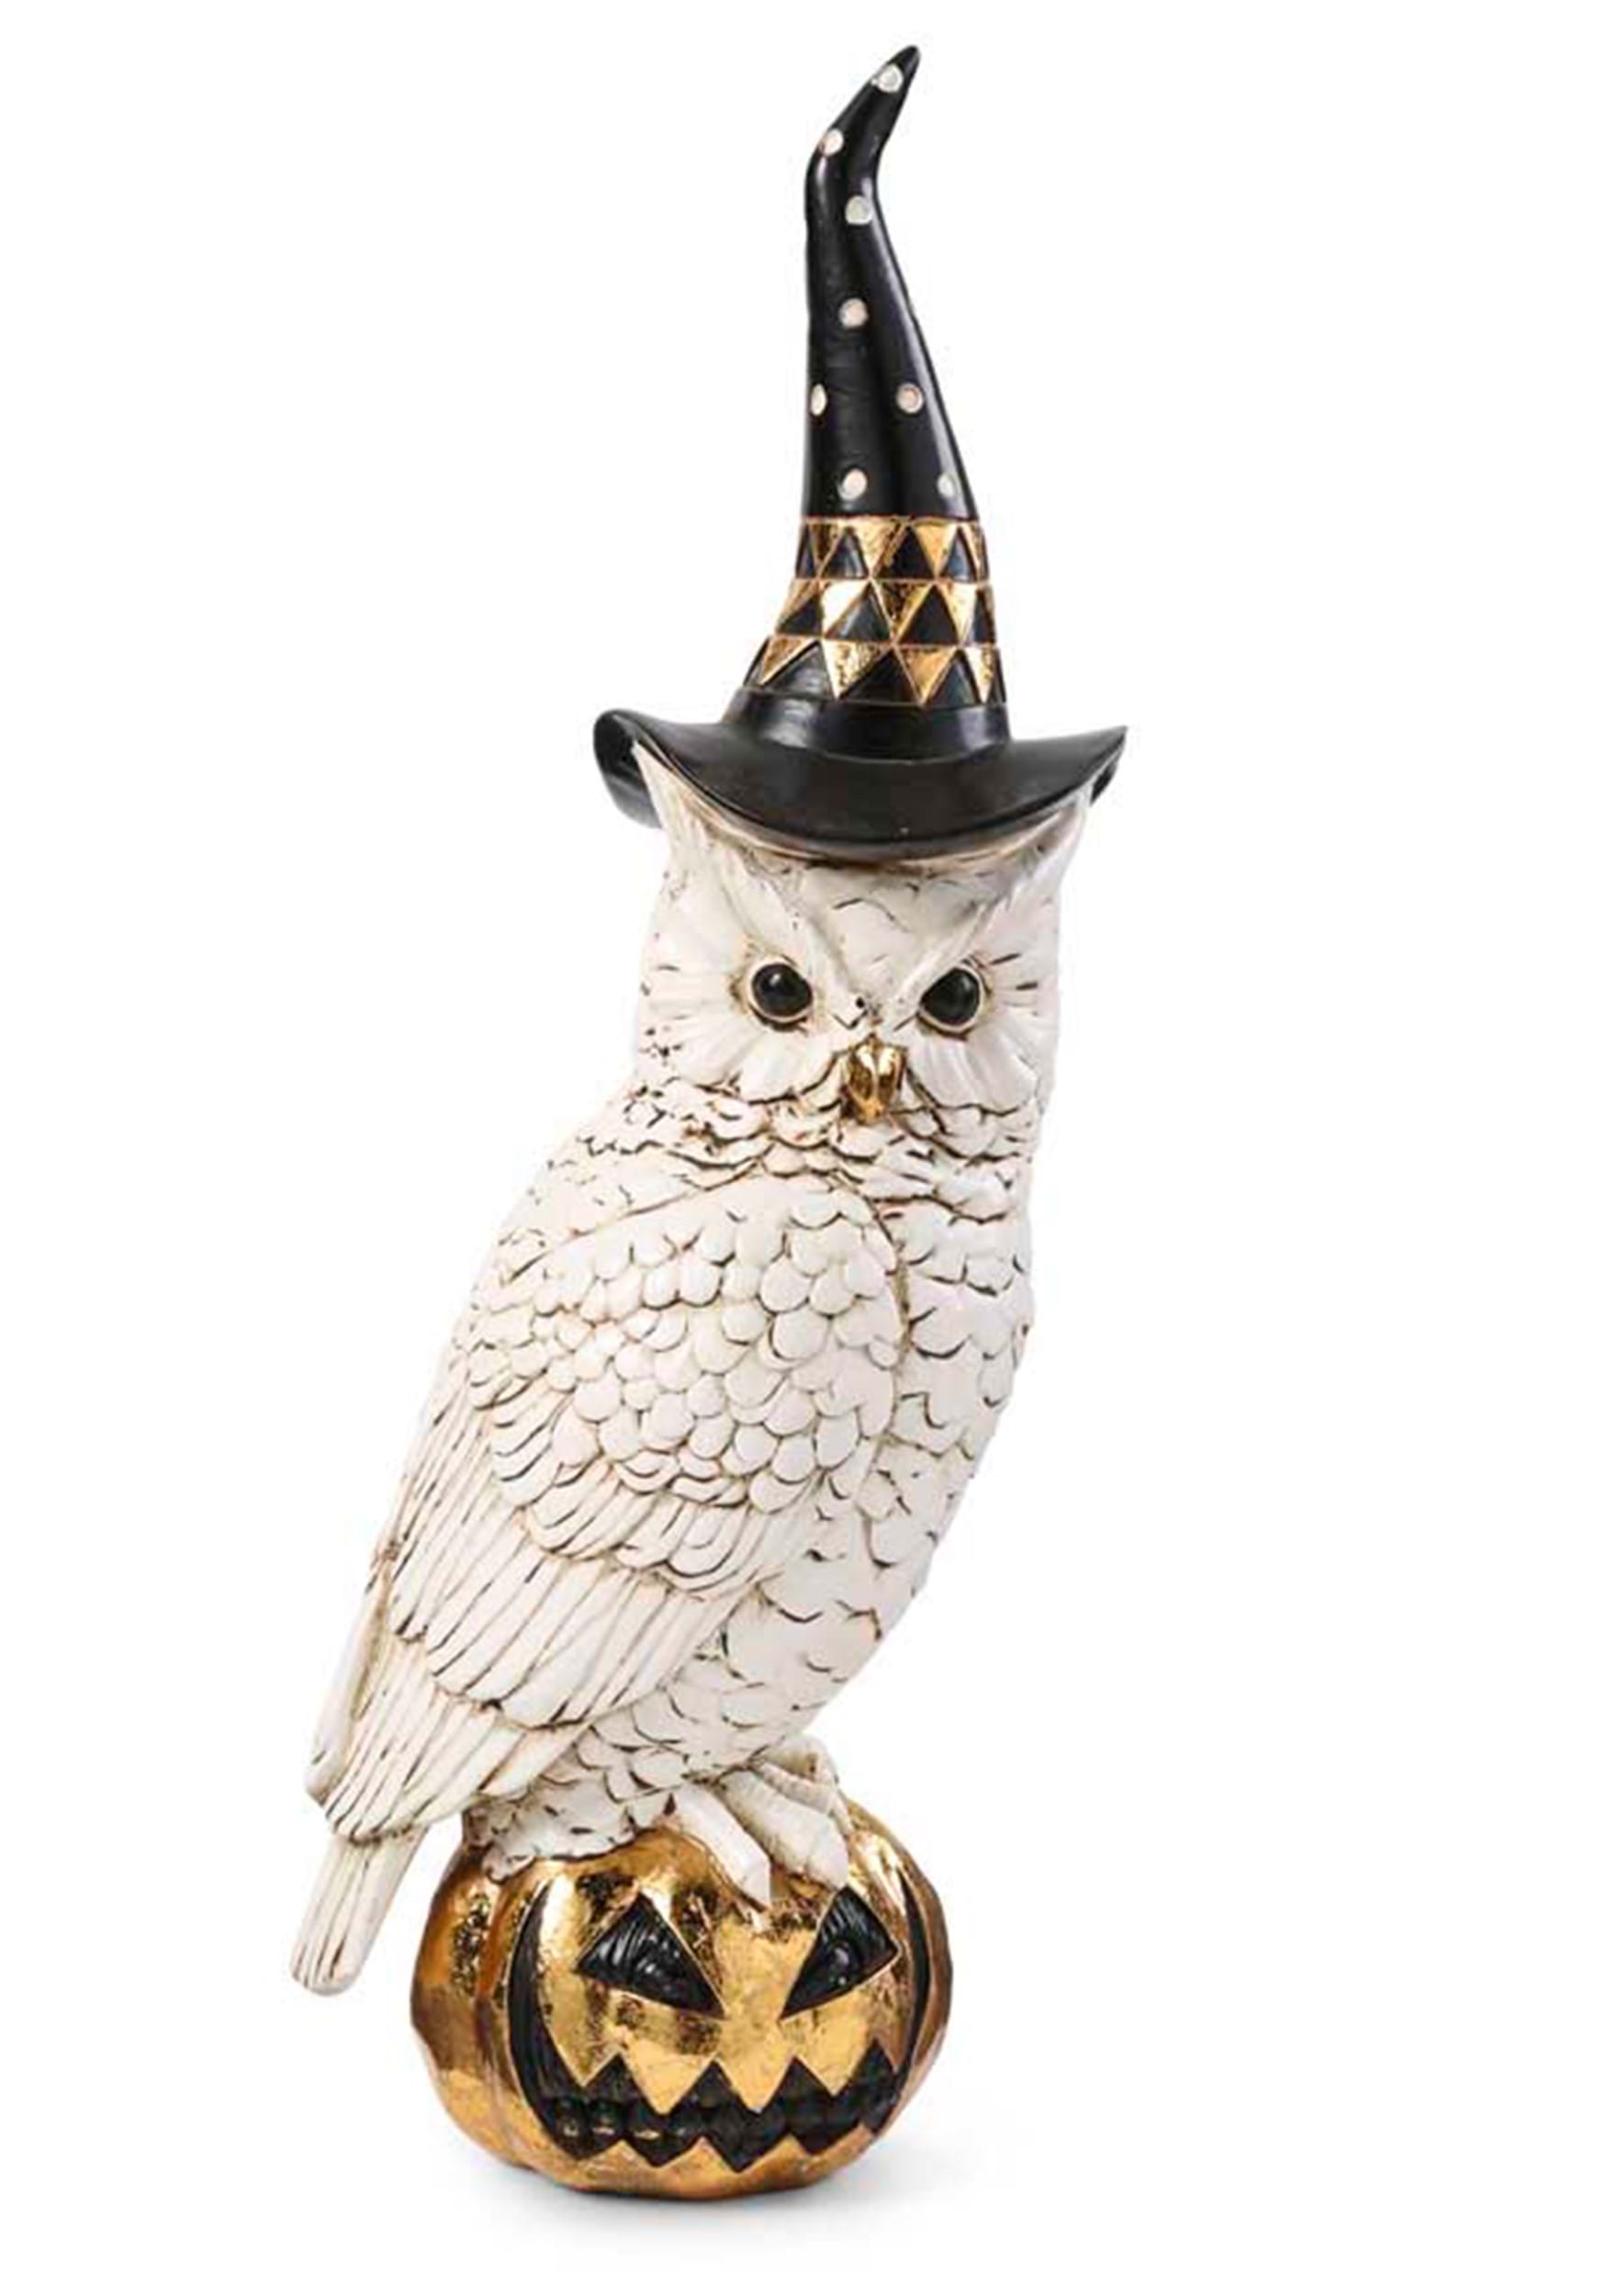 14-Inch White Owl with Witch Hat on Jack O Lantern Halloween Prop